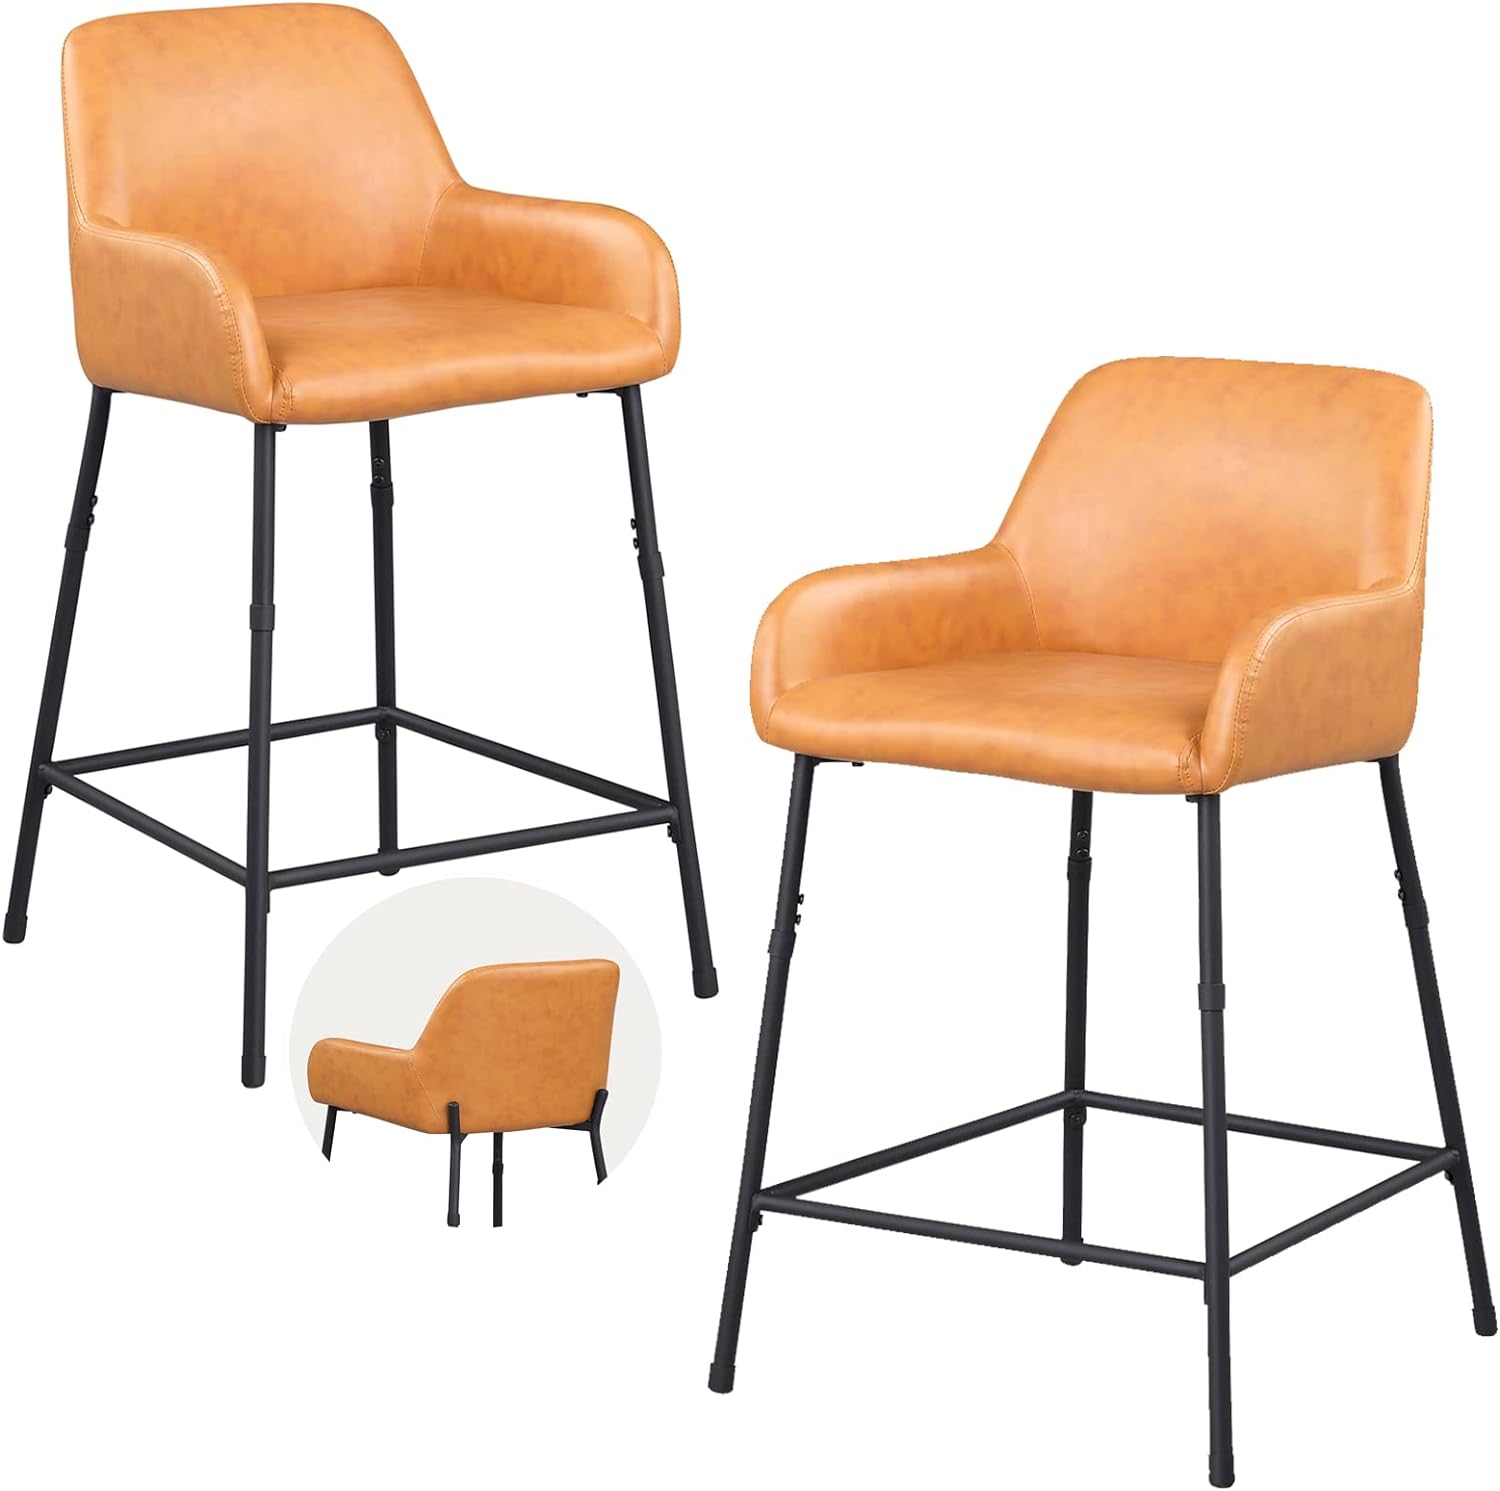 Elegant High-Back Counter Chairs （Set of 2）EXTRA 55%OFF AT CHECKOUT